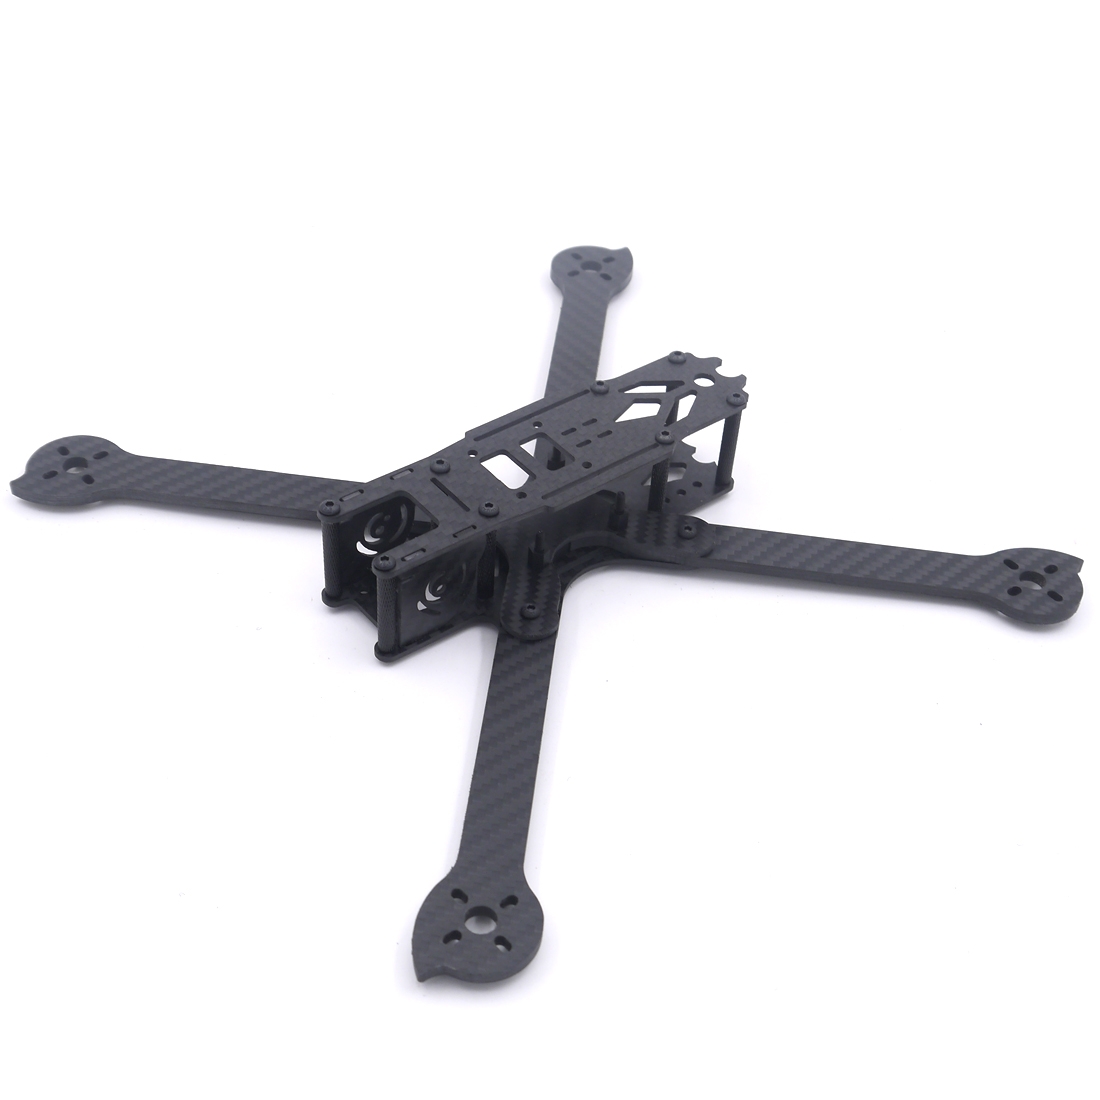 LEACO XL7 298mm 7 Inch FPV Racing Frame Kit Freestyle Carbon Fiber For RC Drone